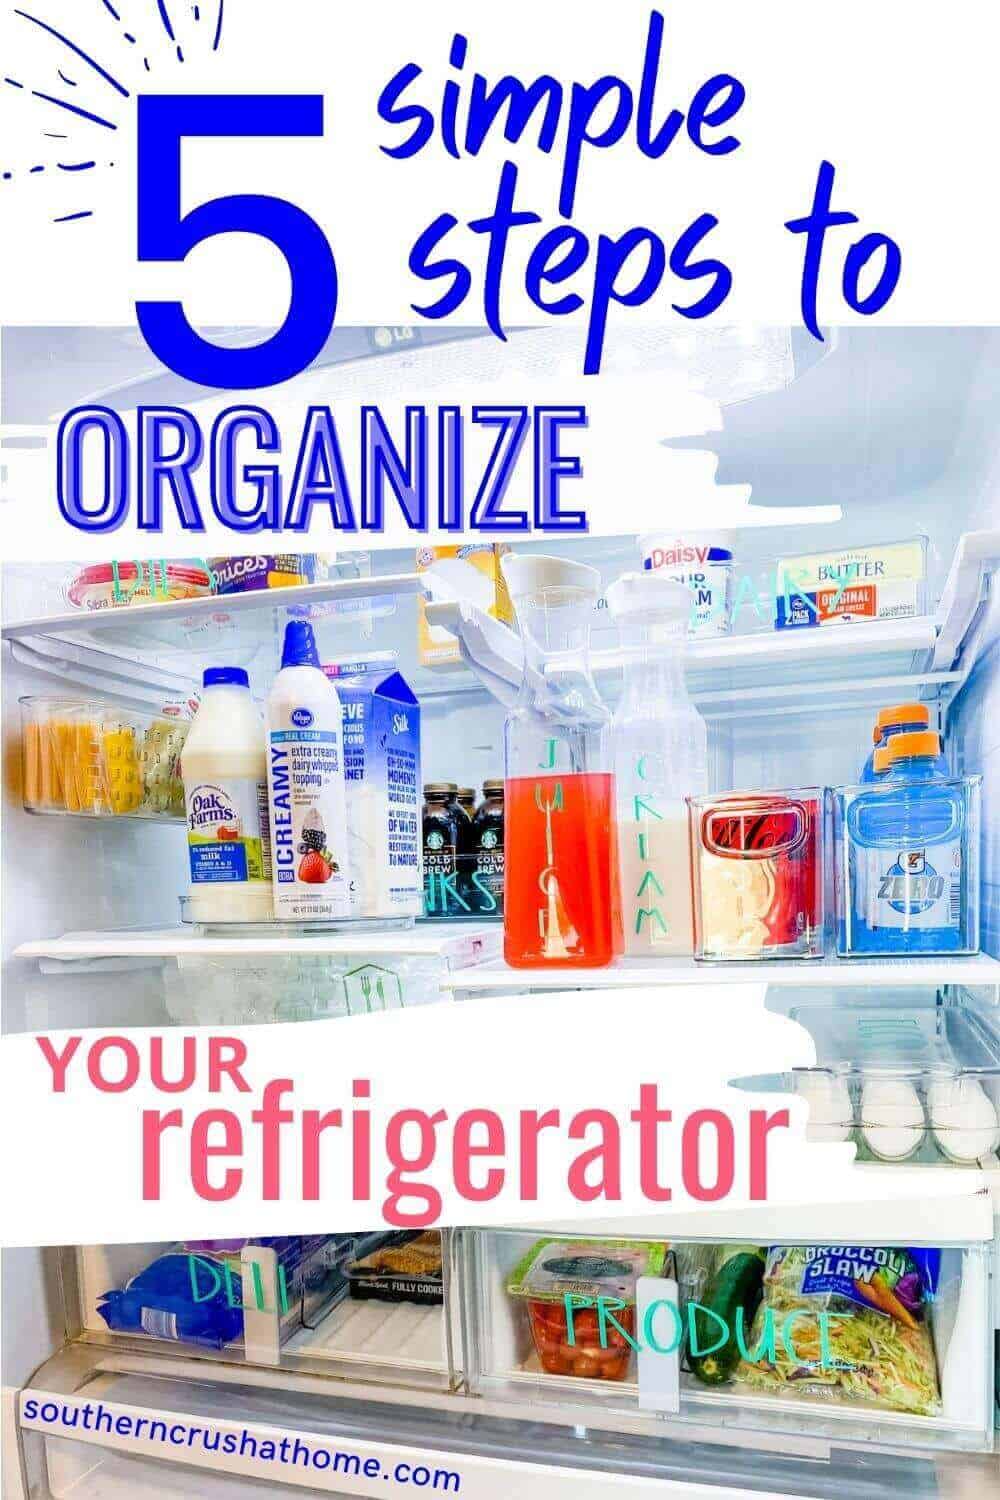 https://www.southerncrushathome.com/wp-content/uploads/2022/02/organize-your-refrigerator-PIN-1-1.jpg